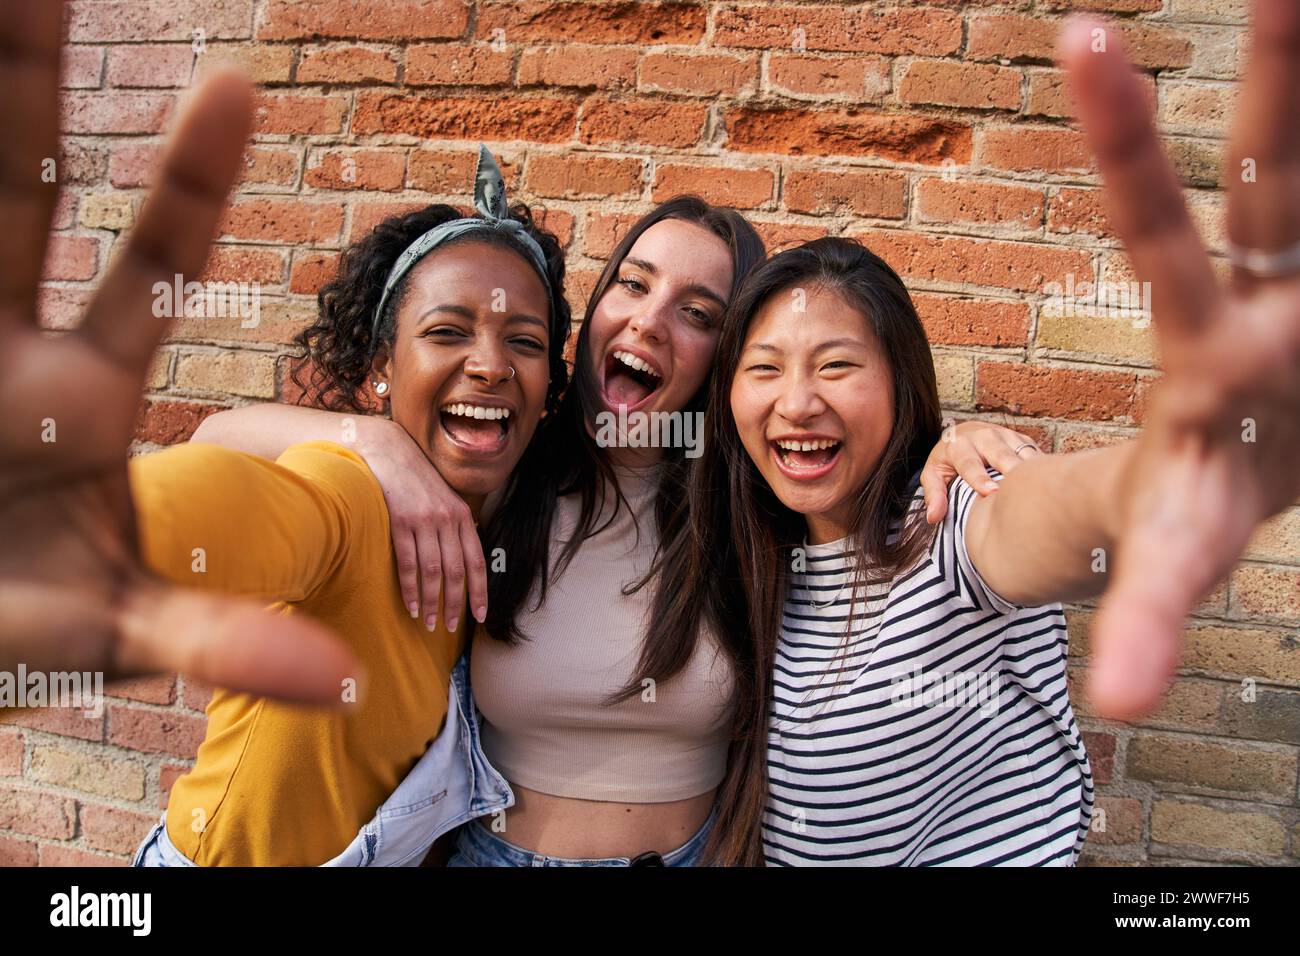 Portrait three excited multiracial joyful girls outdoors. Young females having fun posing for photo. Stock Photo